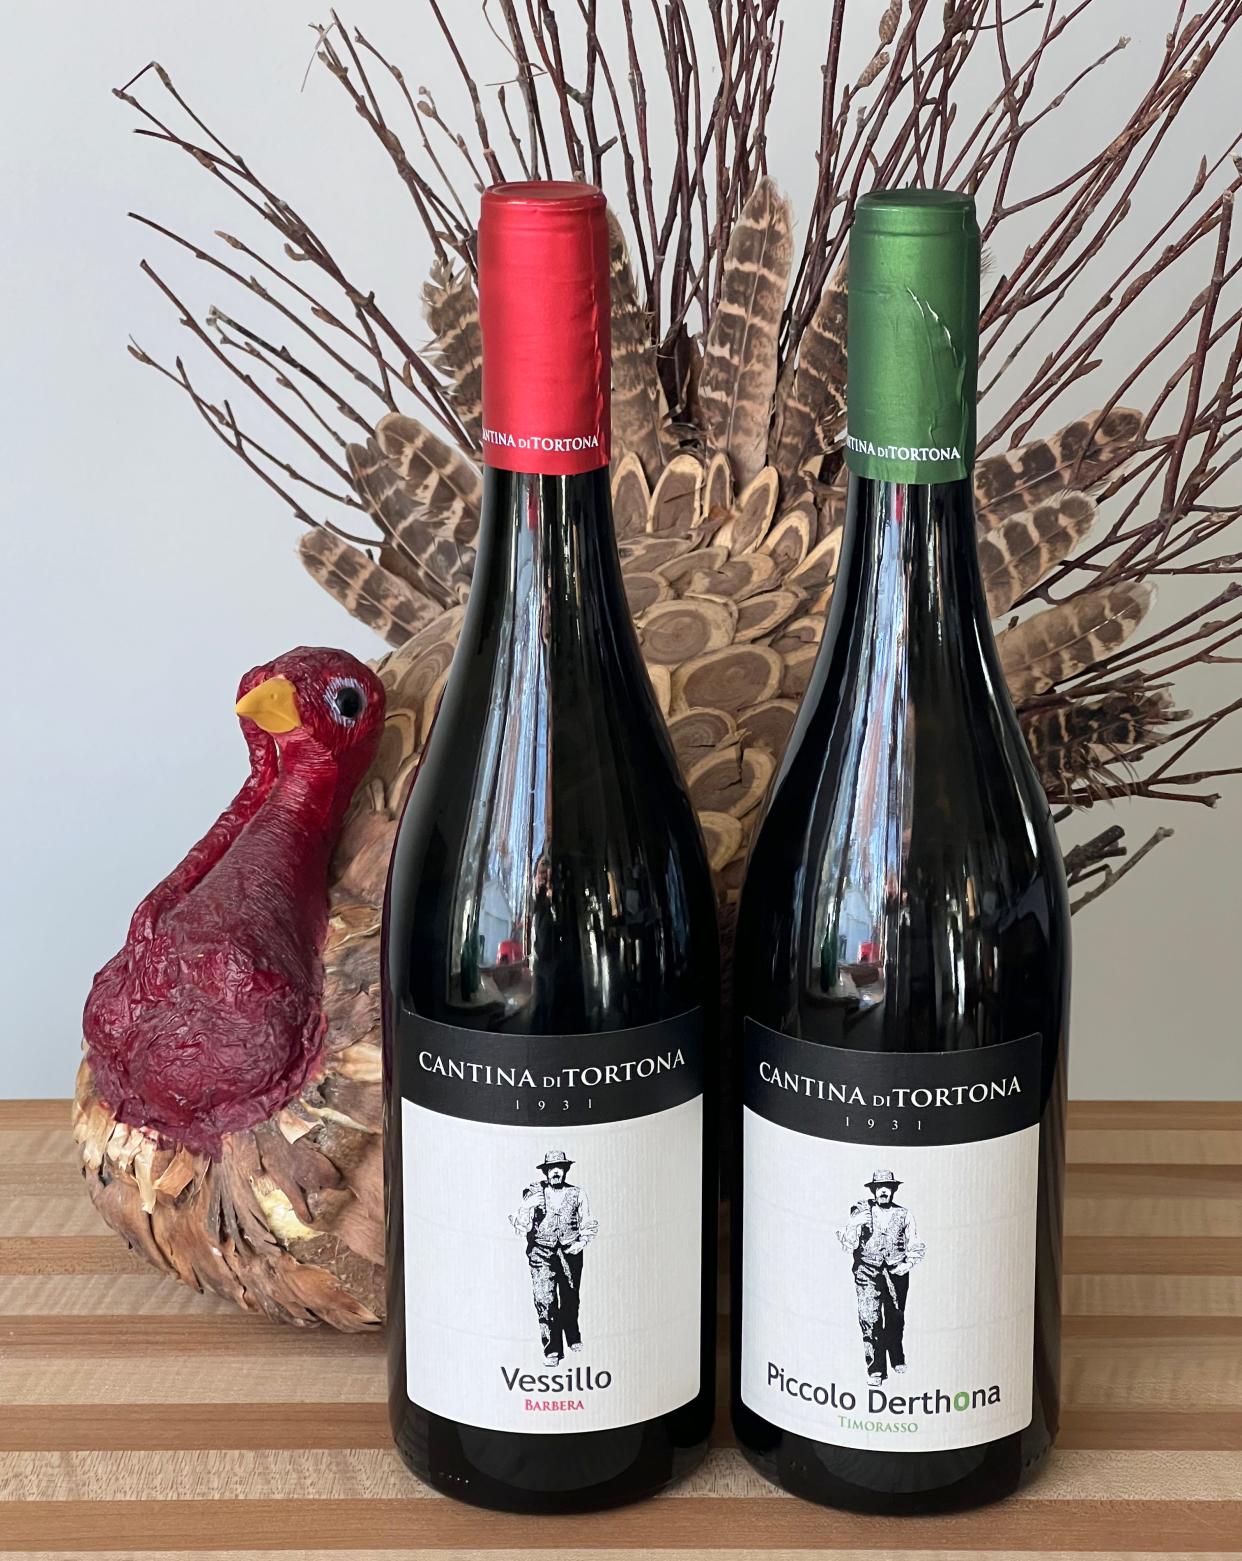 Two Italian wines to enjoy with your Thanksgiving Day feast: a red barbera and a white timorasso, from Cantine Di Tortona.